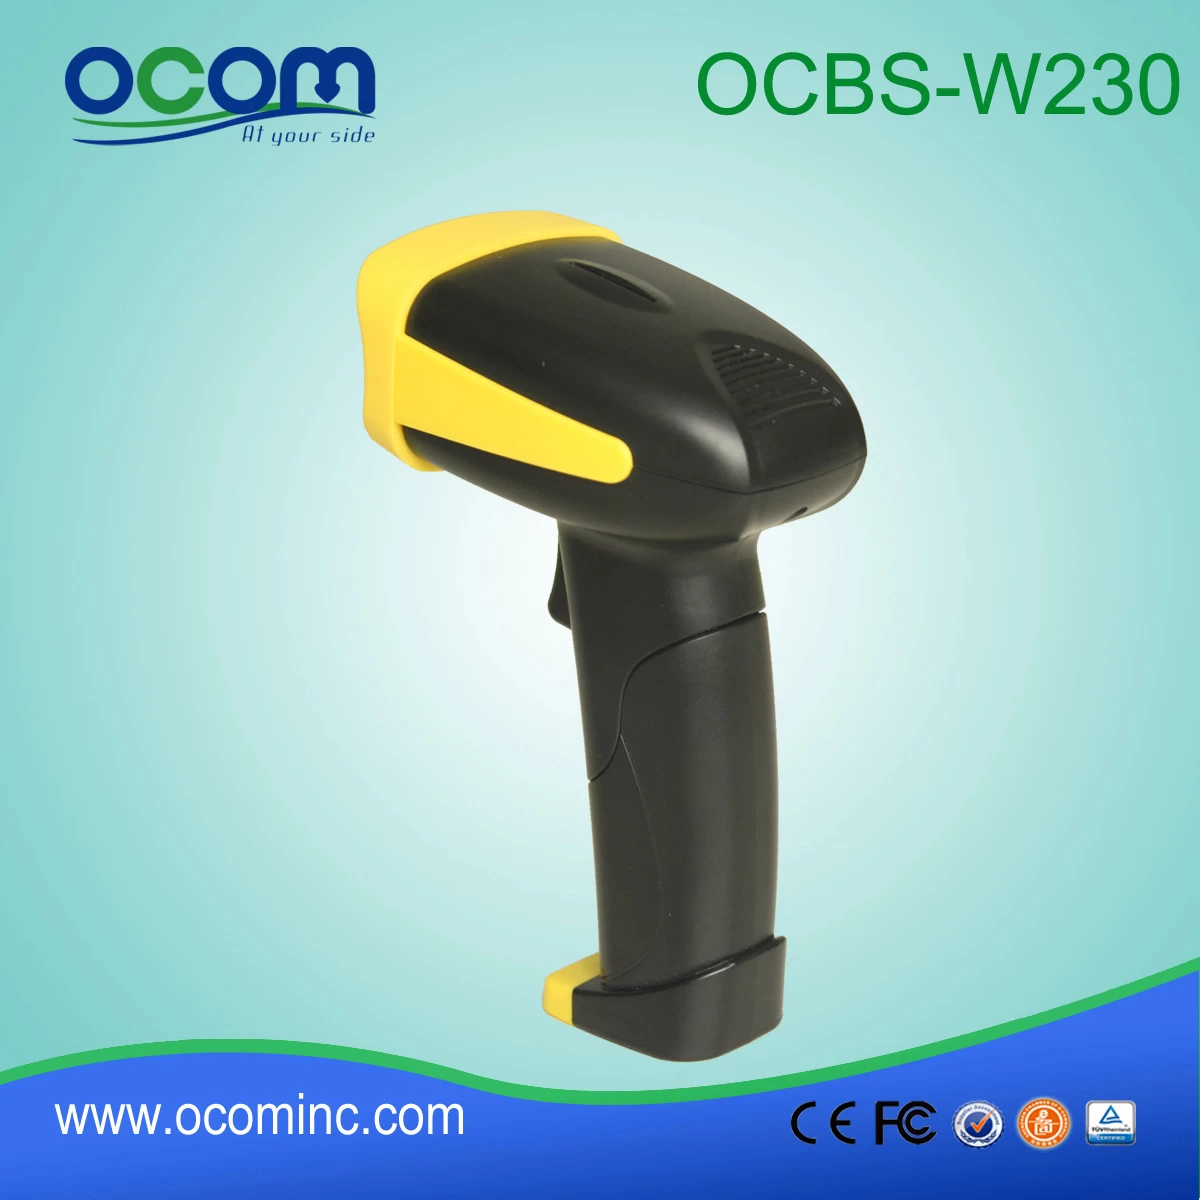 China supplier function of barcode scanner 433MHz with memory